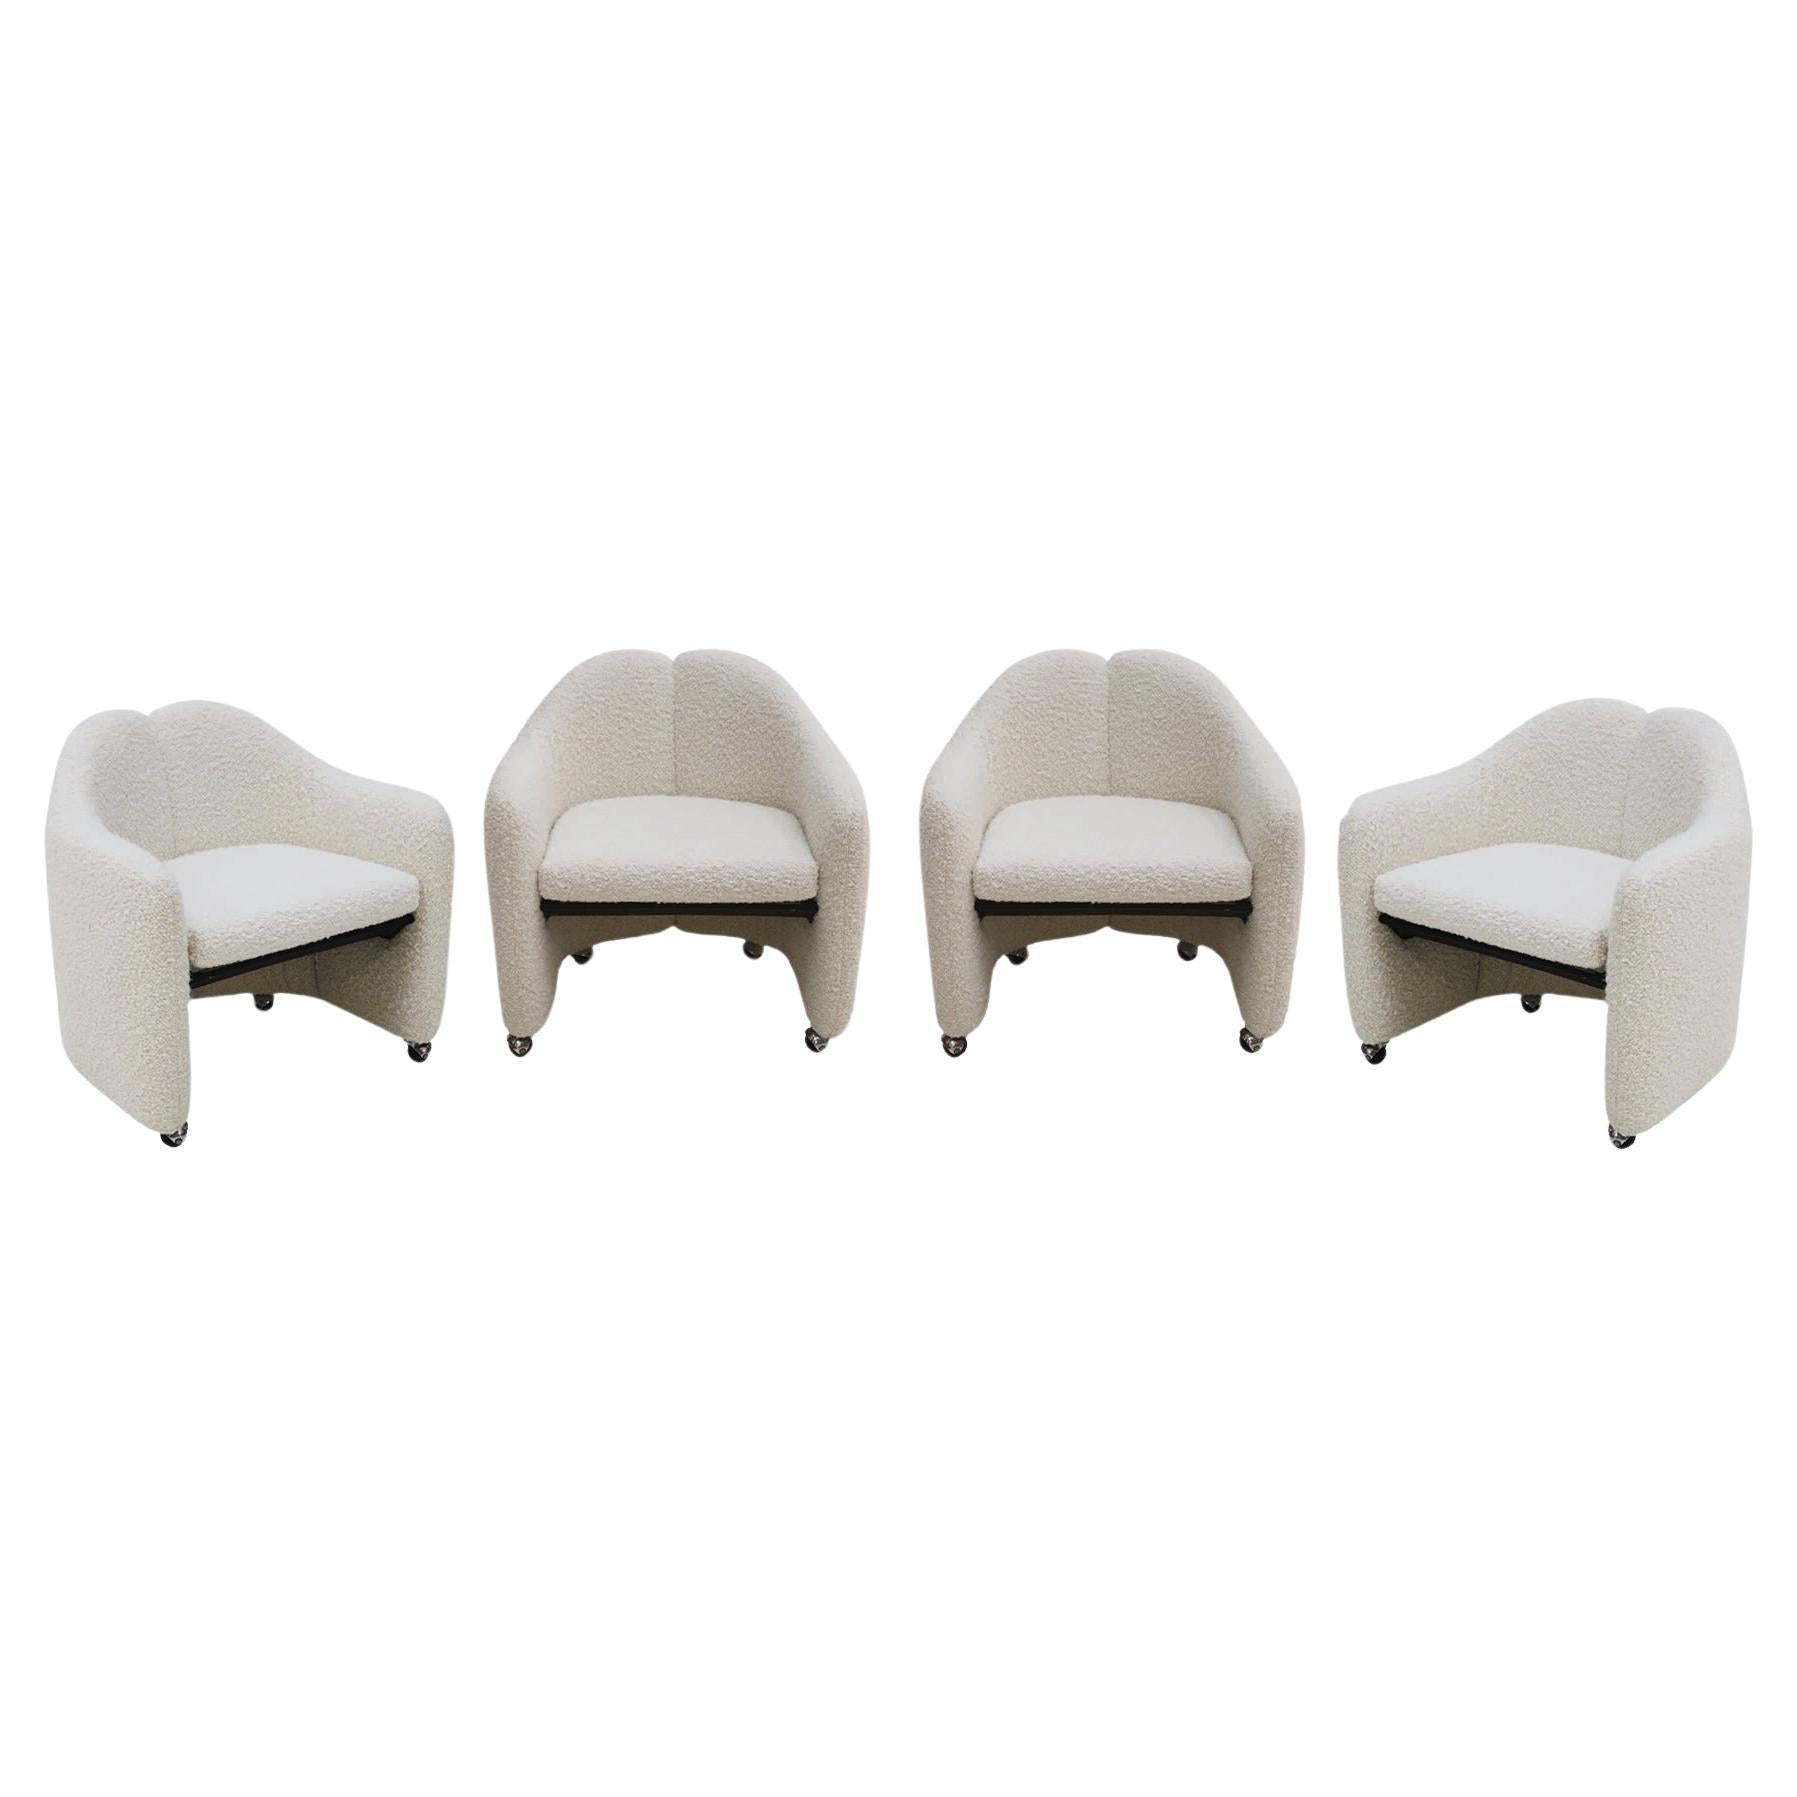 Set of Four PS142 Chairs Designed By Eugenio Gerli, Italy 1960's